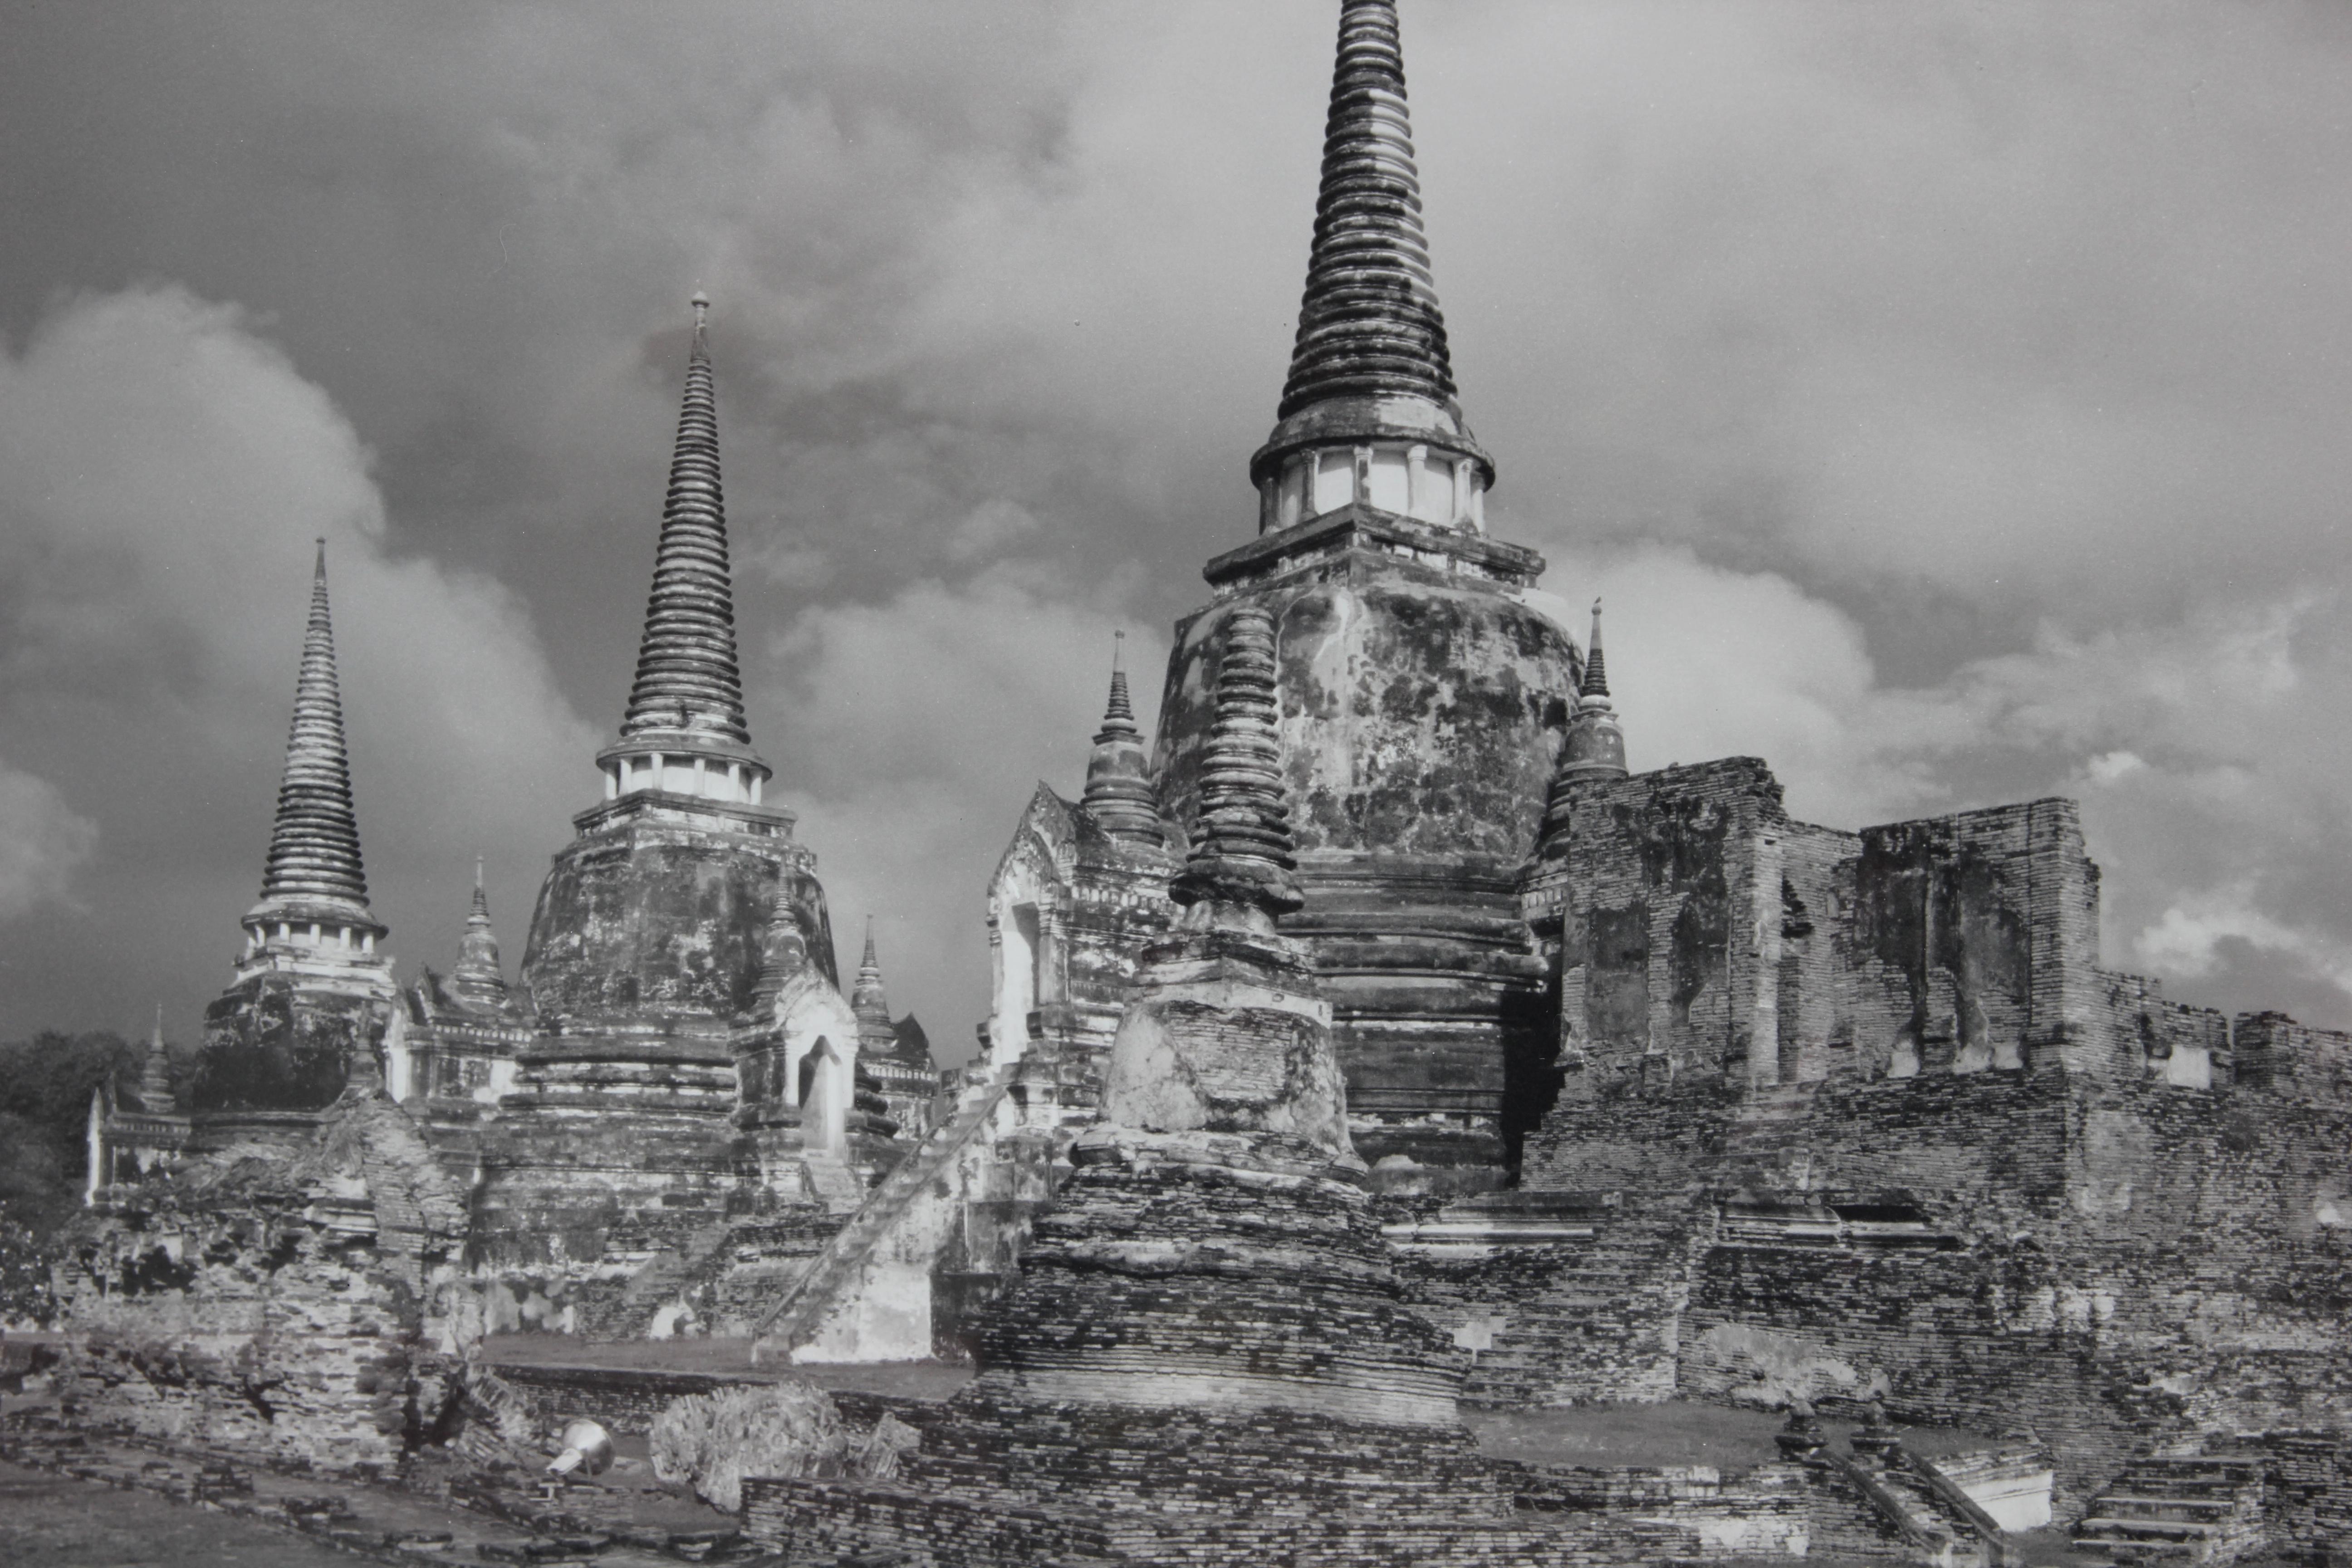 Wat Phra Si Sanphet was the holiest temple on the site of the old Royal Palace in Thailand's ancient capital of Ayutthaya until the city was destroyed by the Burmese in 1767. It was the grandest and most beautiful temper in the capital, and it